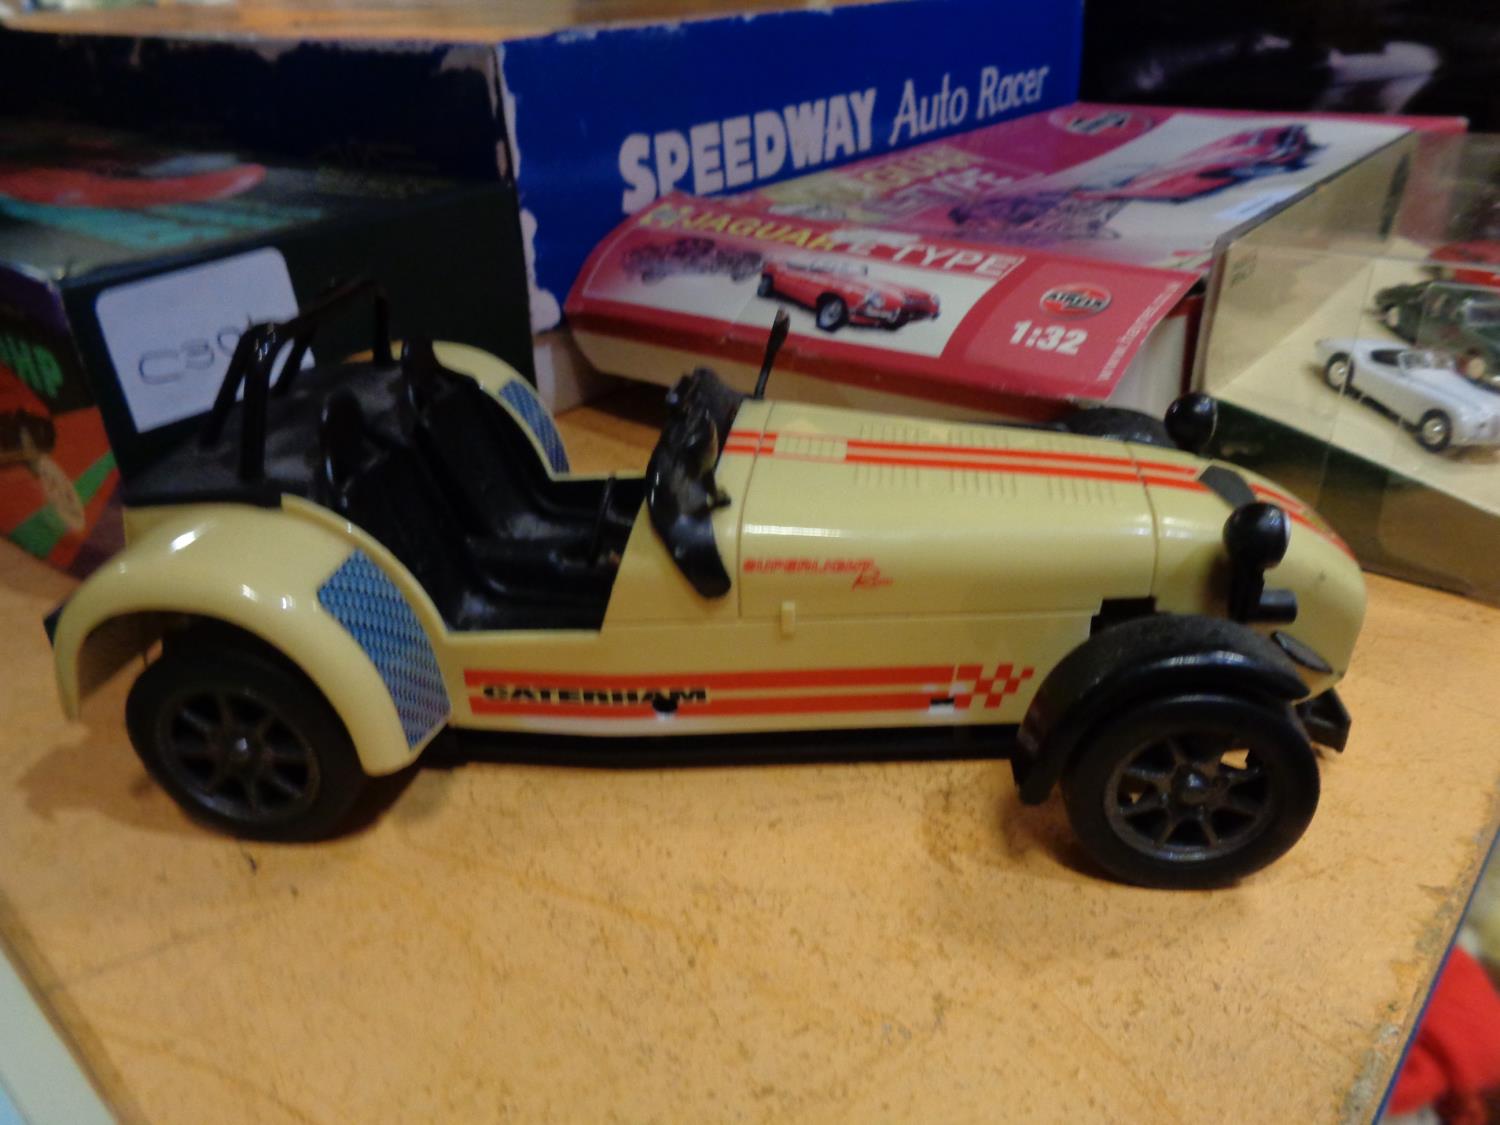 VARIOUS CAR RELATED ITEMS TO INCLUDE A SPEEDWAY AUTO RACER SET, A SUNBEAM, E TYPE JAGUAR ETC - Image 2 of 3